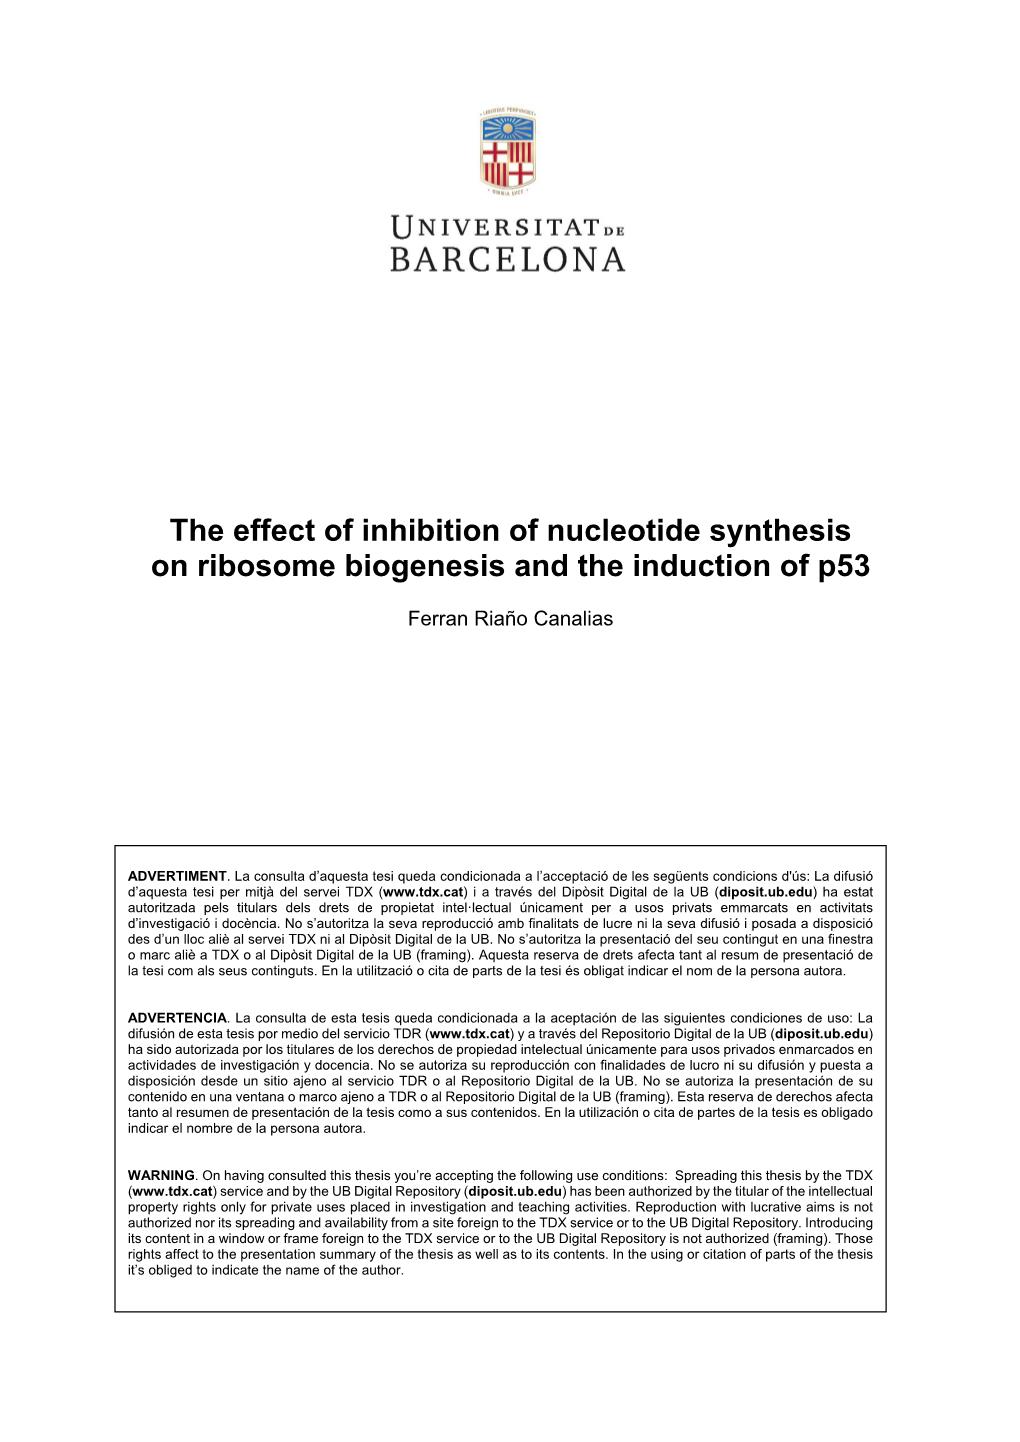 The Effect of Inhibition of Nucleotide Synthesis on Ribosome Biogenesis and the Induction of P53